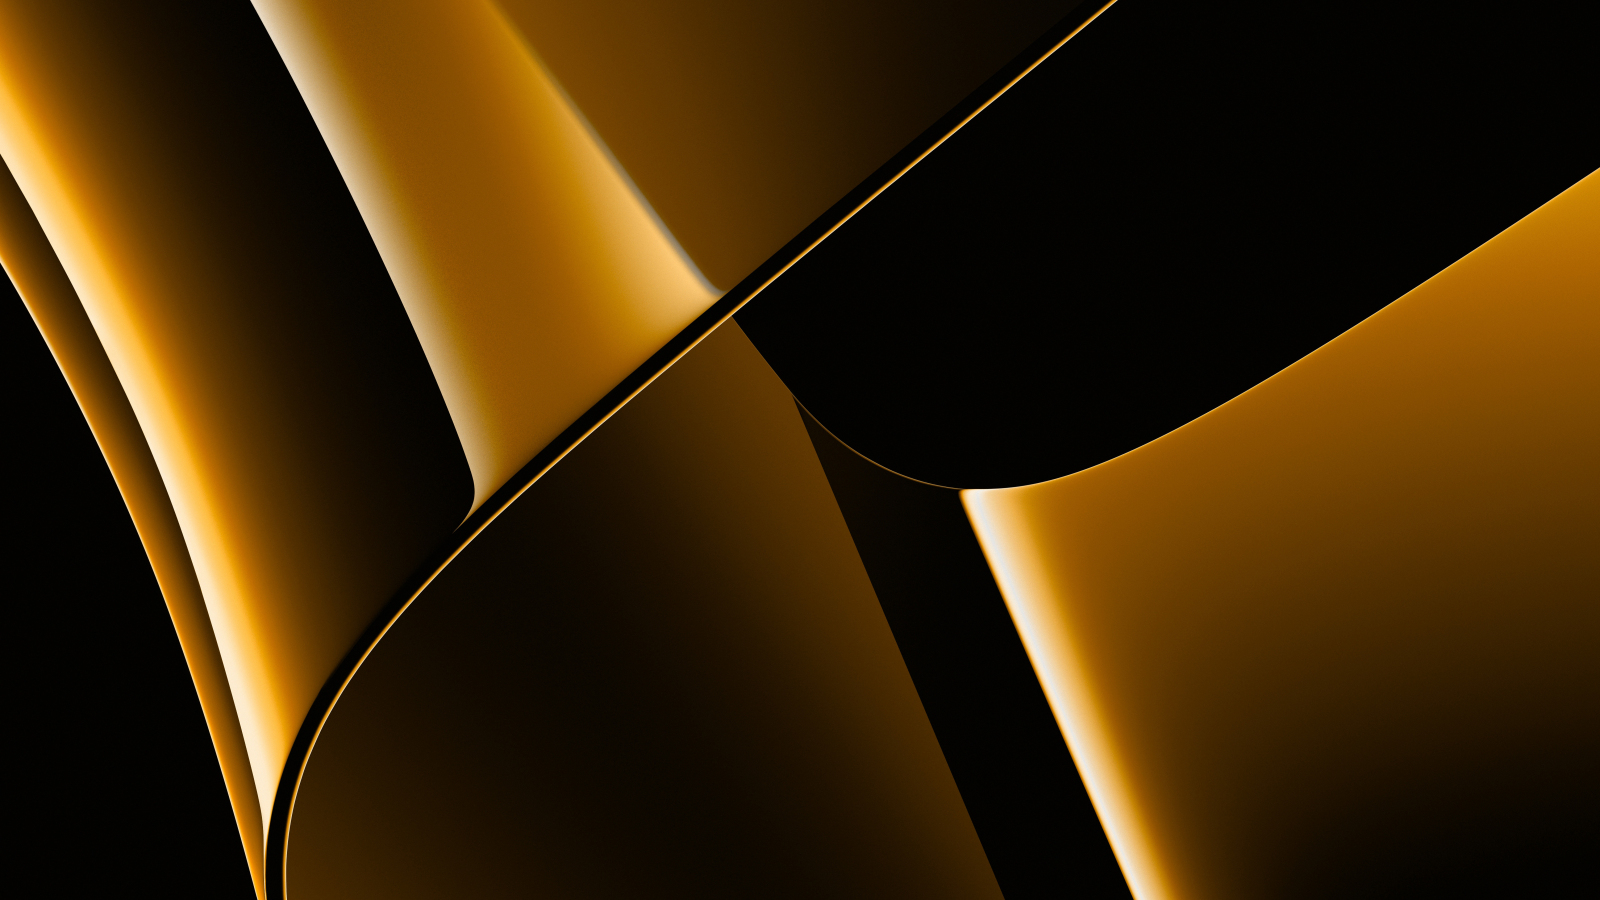 Golden surface, abstract, shapes, 1600x900 wallpaper